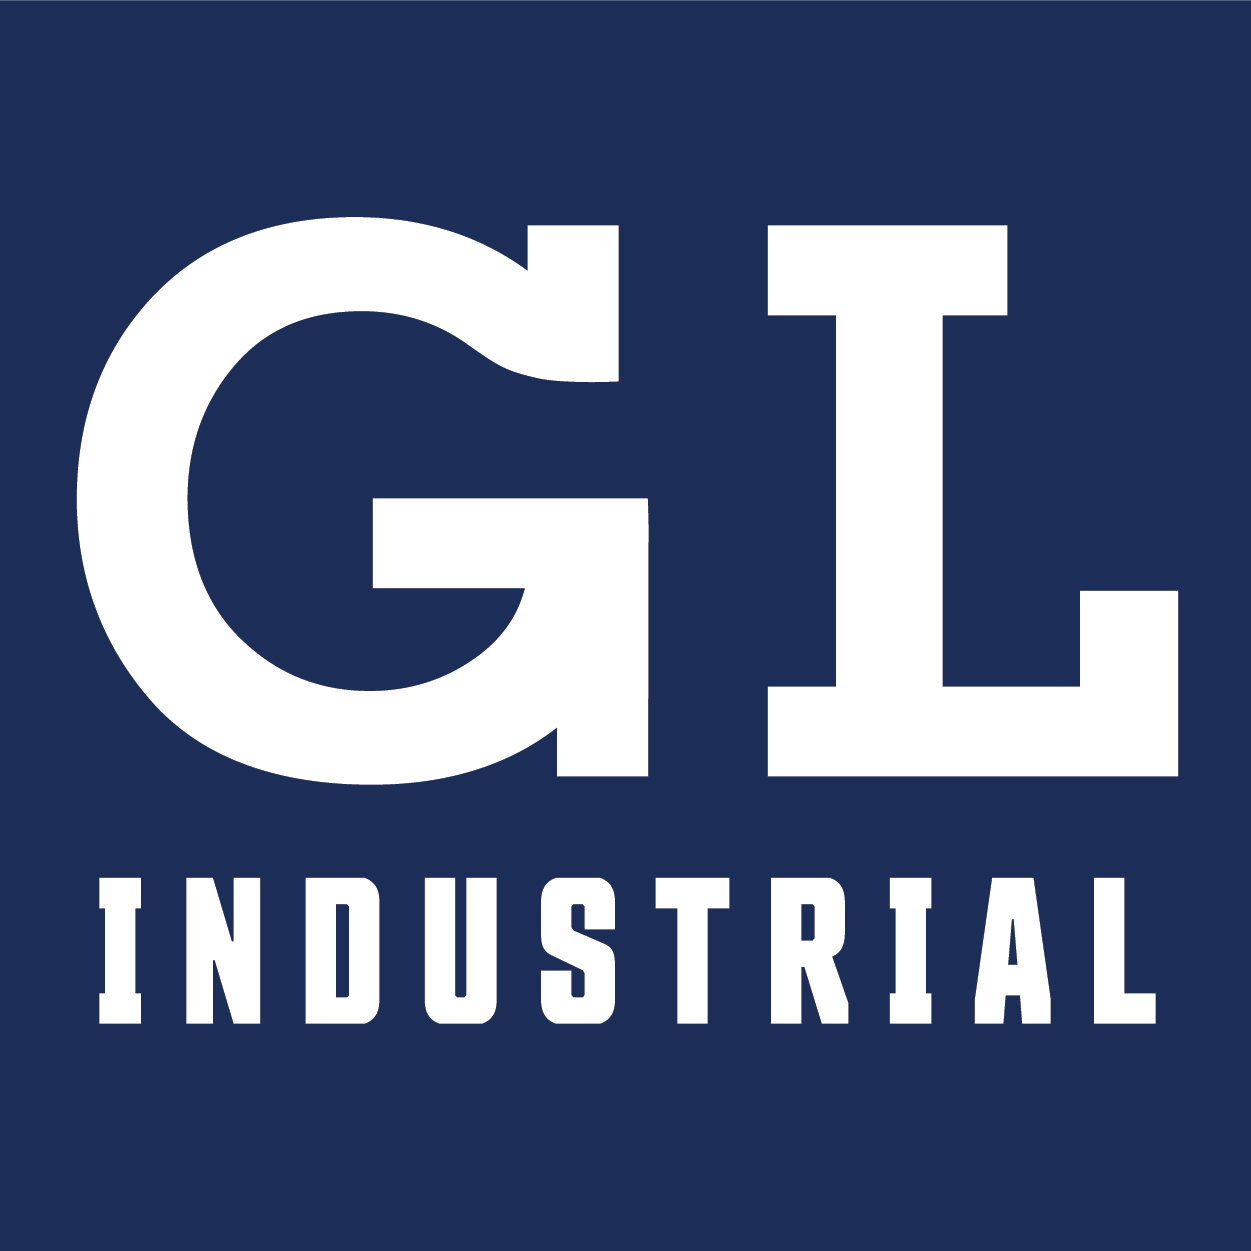 Great Lakes Industrial logo